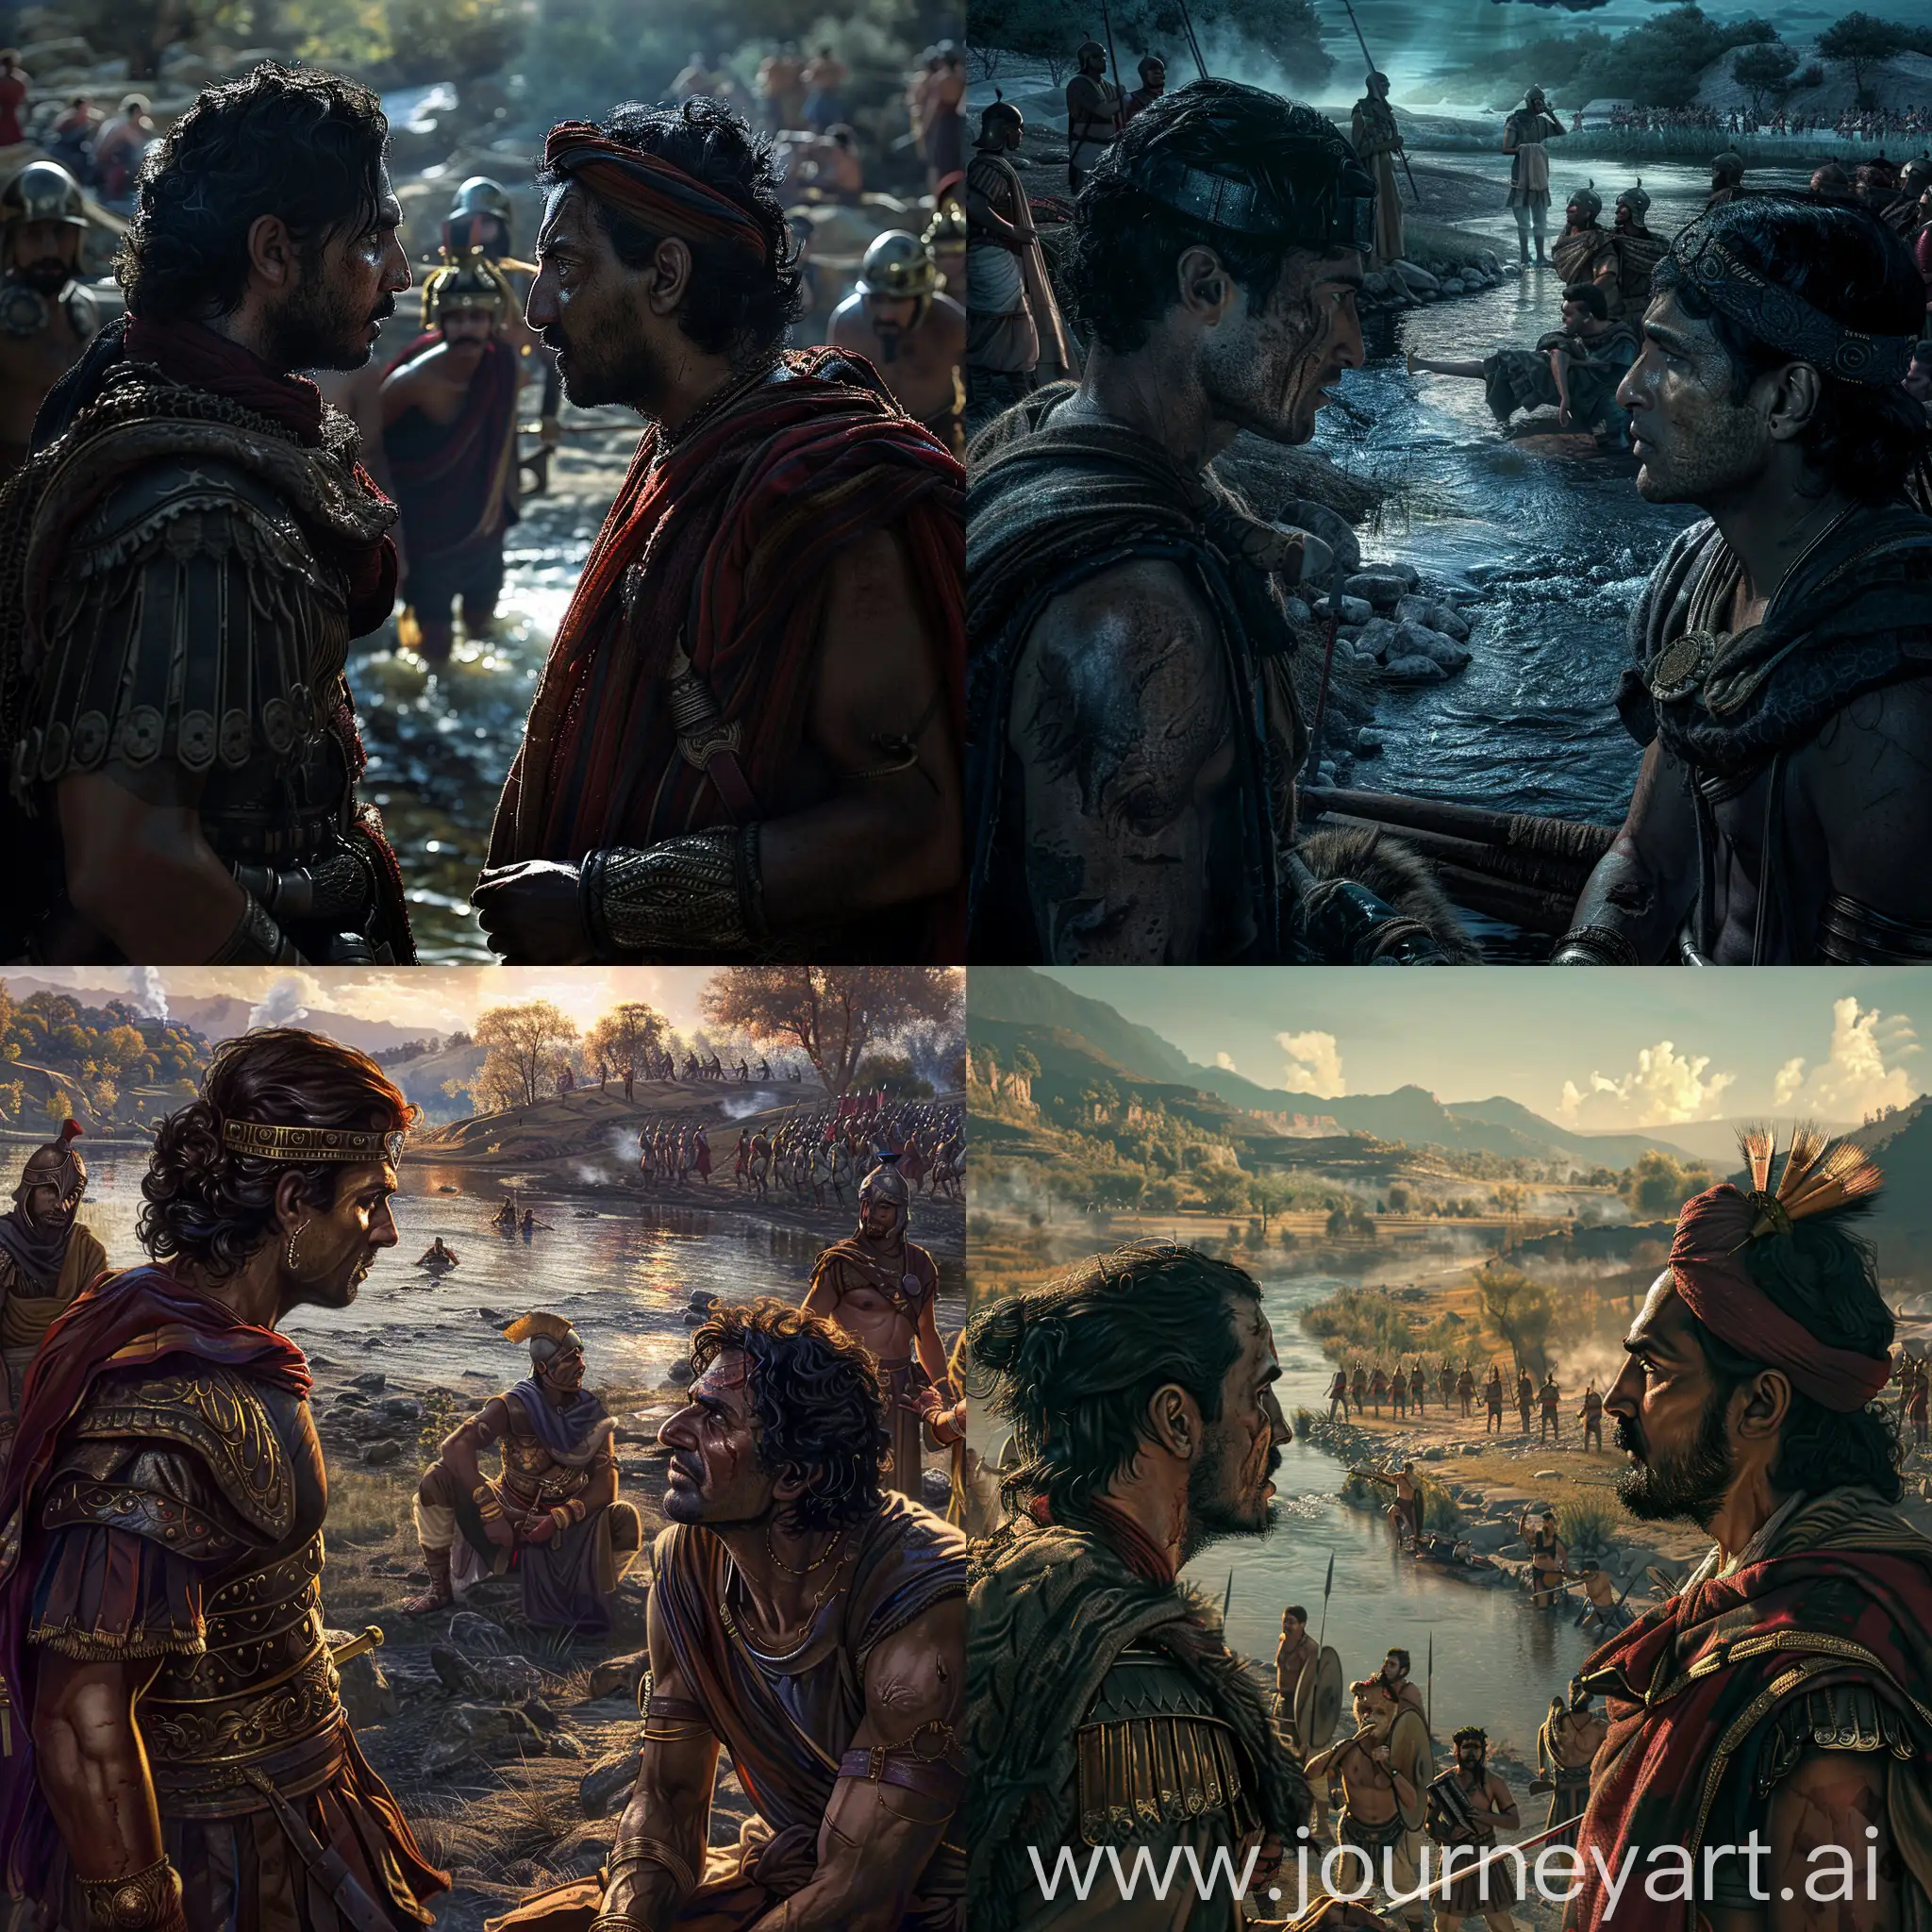 Alexander-the-Great-and-King-Porus-Confrontation-at-Hydaspes-River